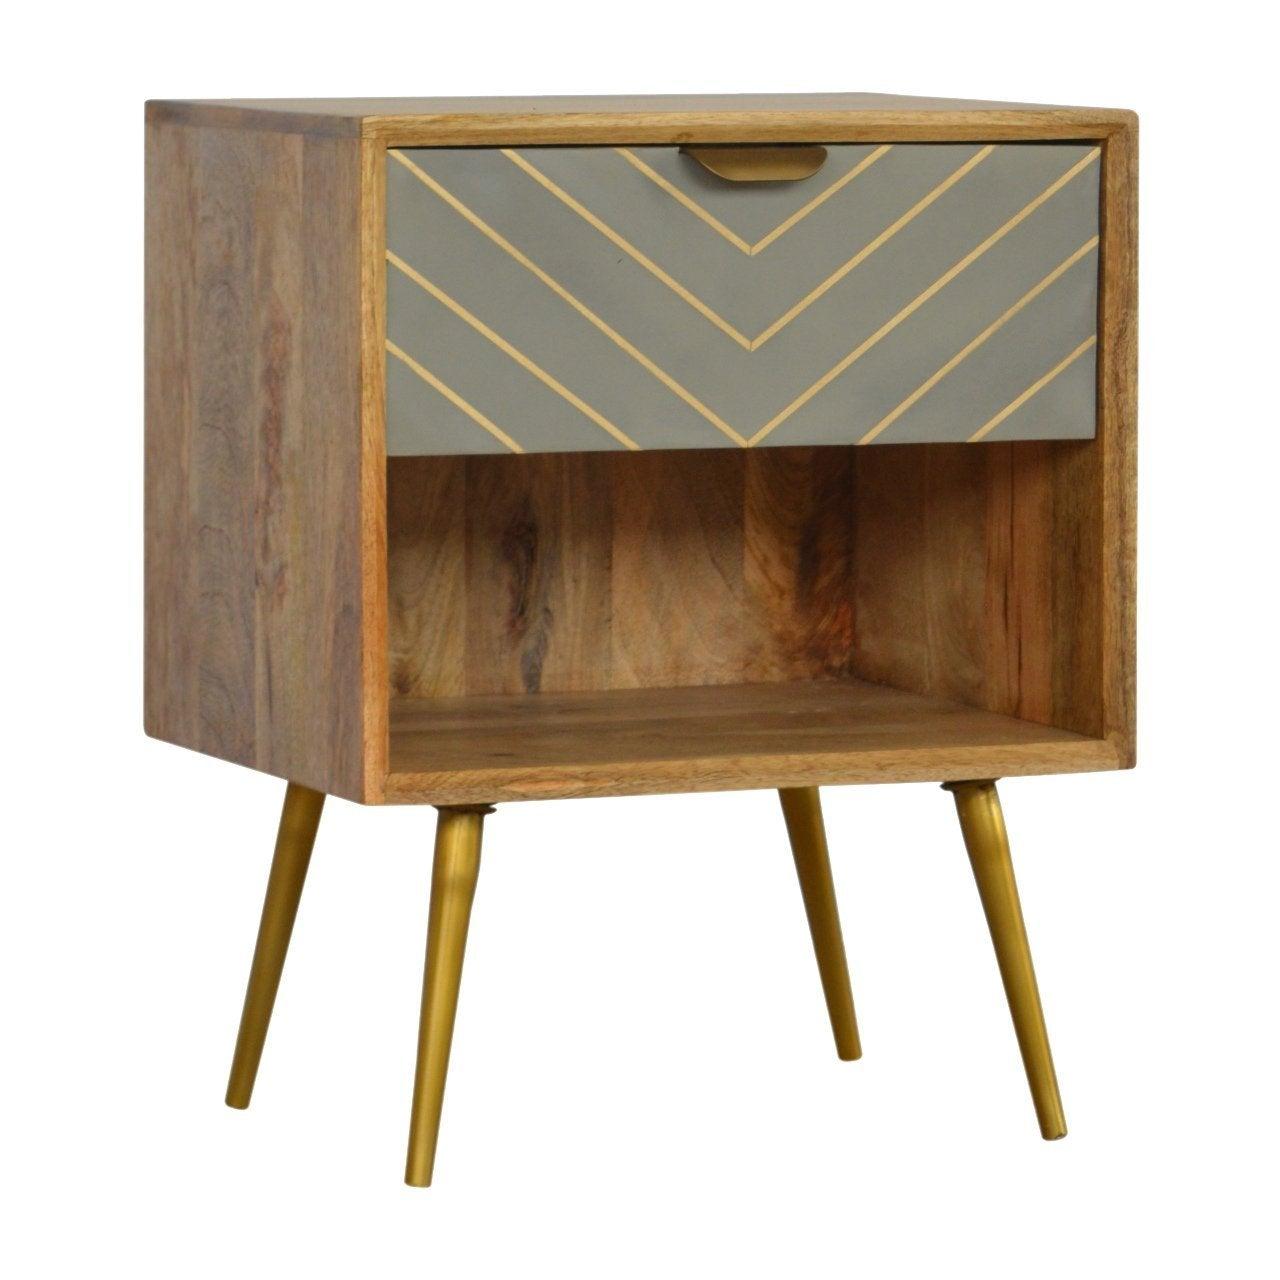 Sleek cement brass inlay bedside table with open slot - crimblefest furniture - image 3